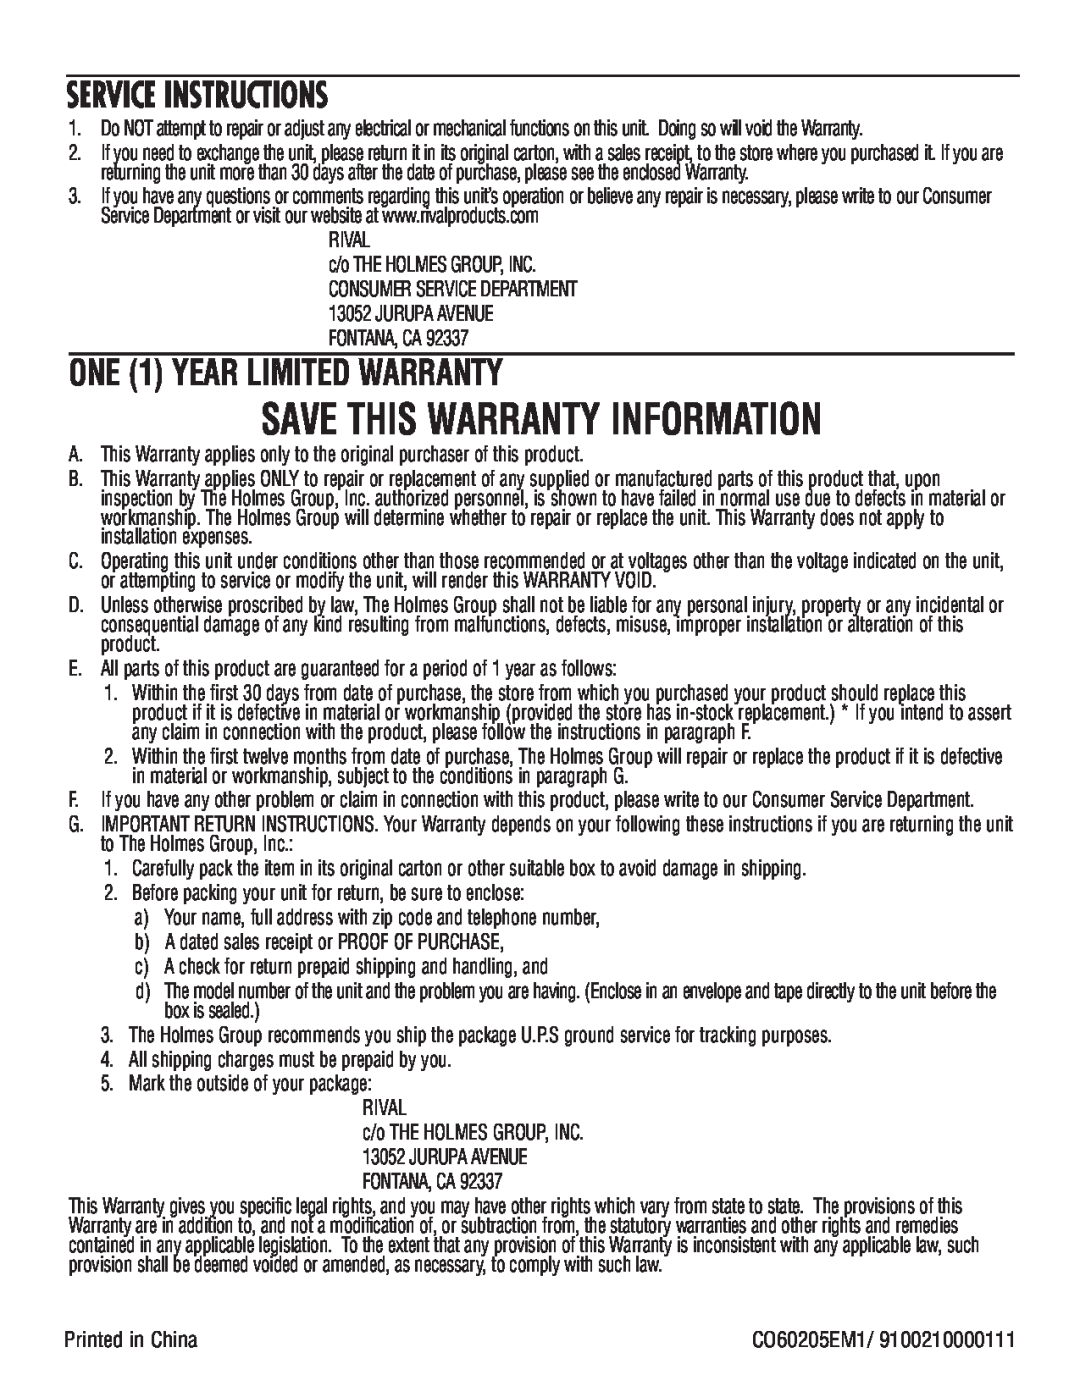 Rival CO602 manual Service Instructions, ONE 1 YEAR LIMITED WARRANTY, Save This Warranty Information 